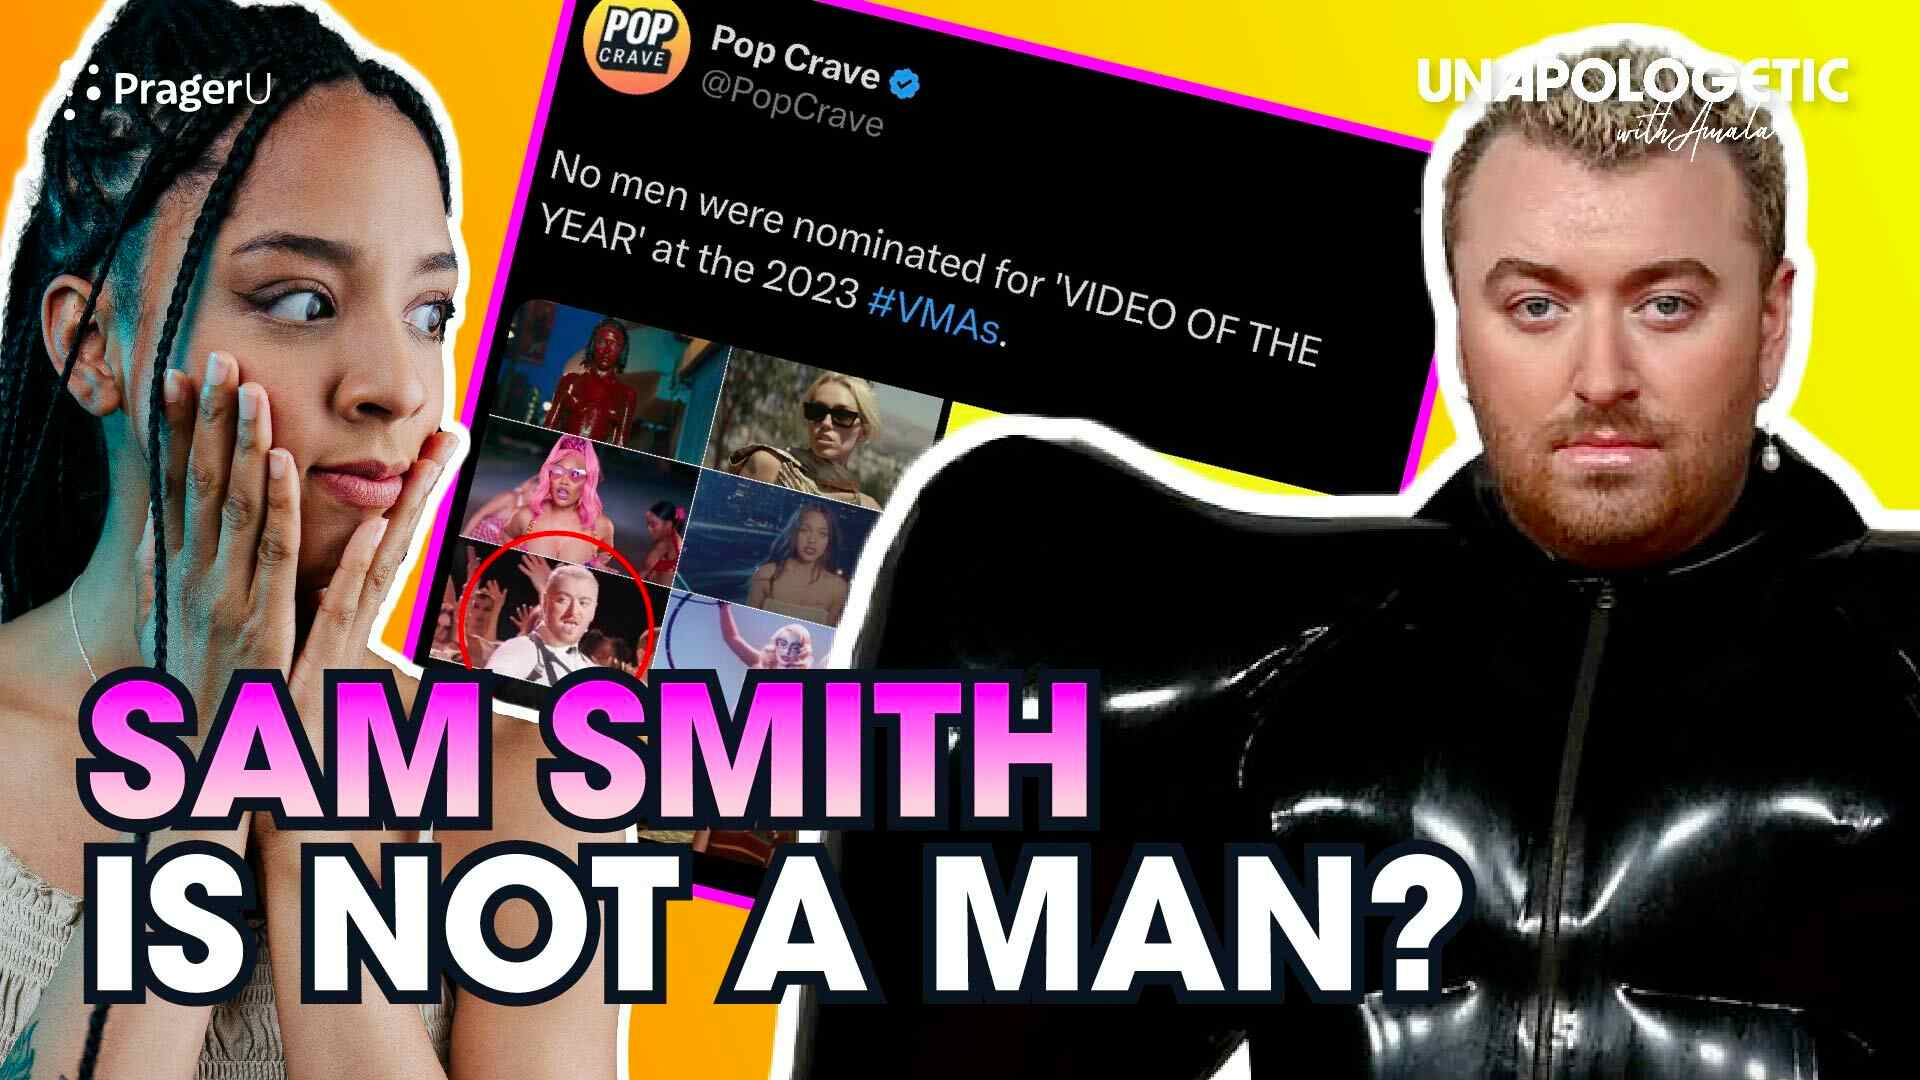 Apparently, Sam Smith Is Not a Man